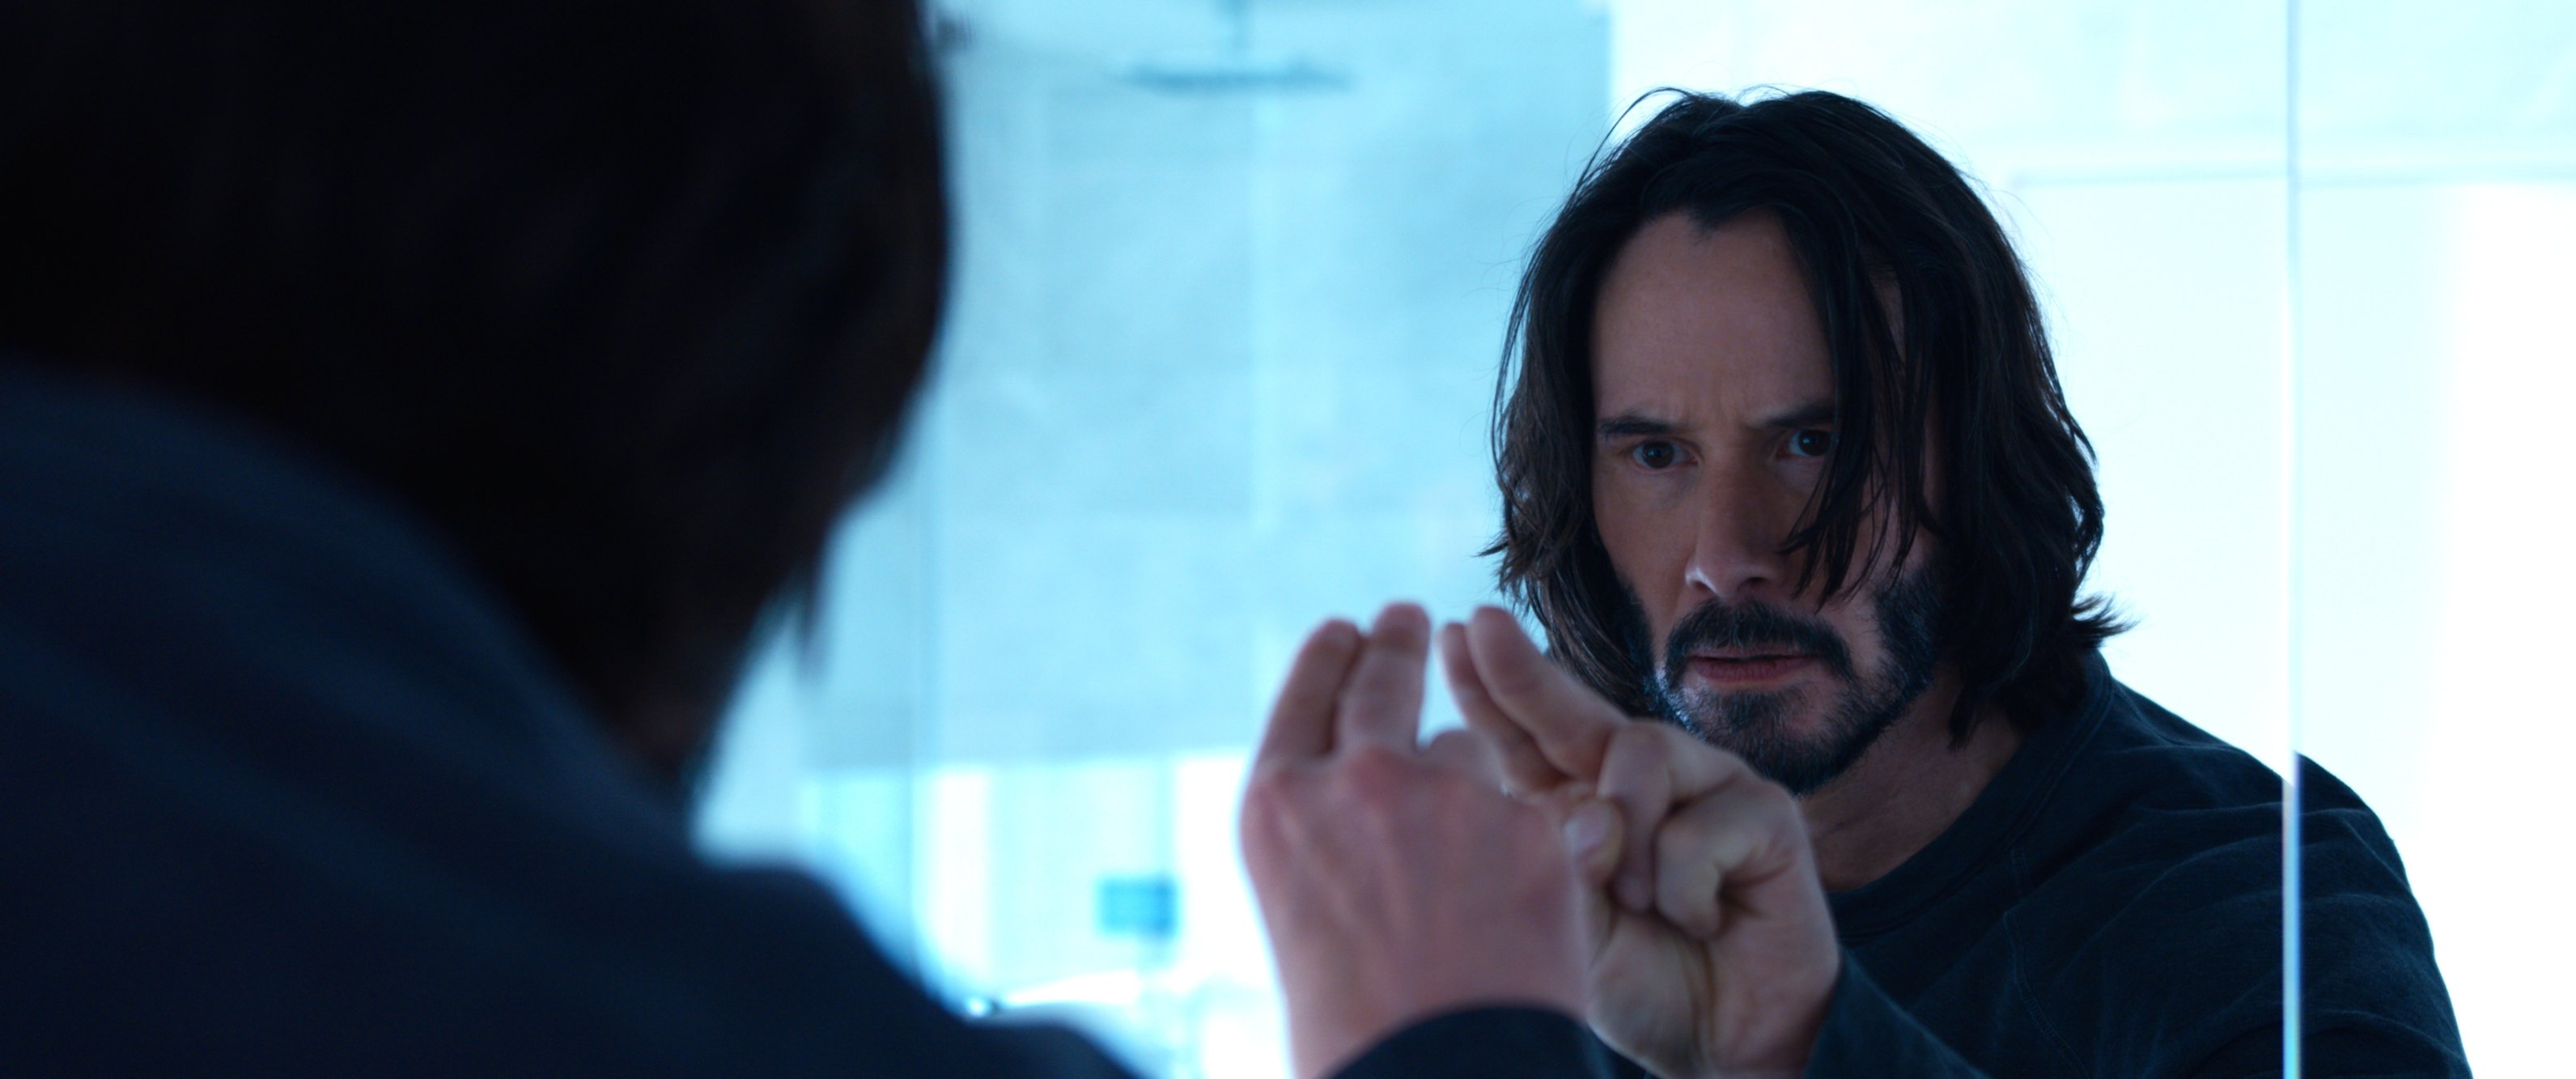 'The Matrix Resurrections' Keanu Reeves as Neo, Thomas A. Anderson poking his fingers toward a mirror